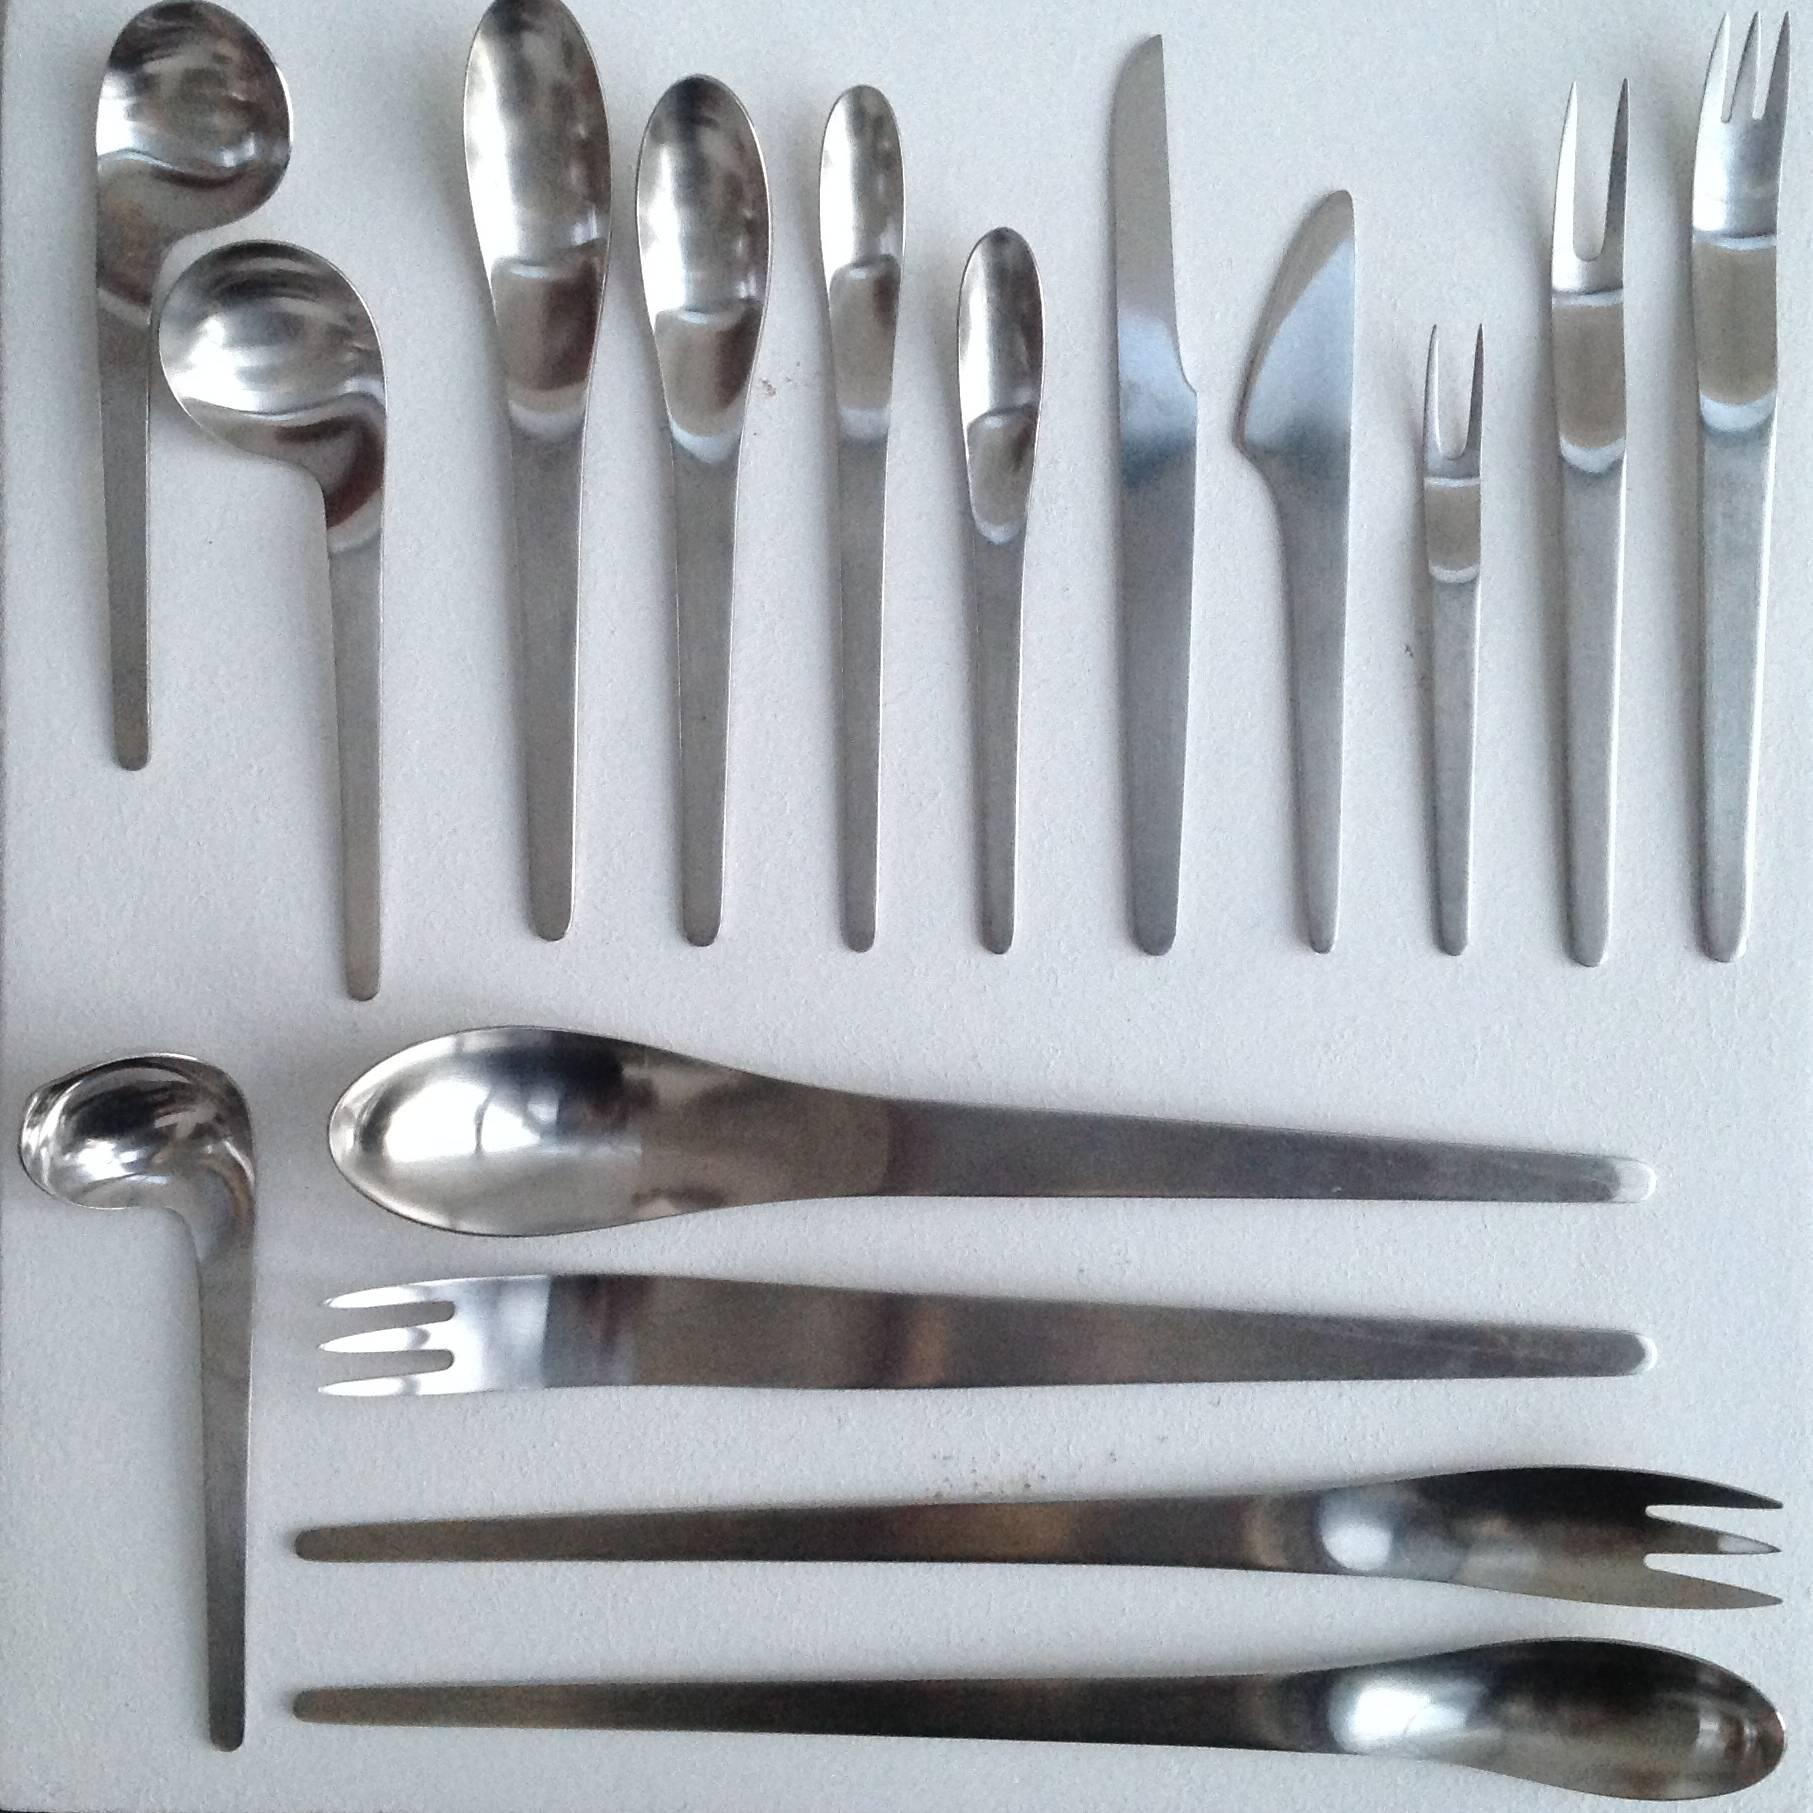 Mid-20th Century Arne Jacobsen Designed Flatware for Eight Made by a. Michelsen in Very Good Cond